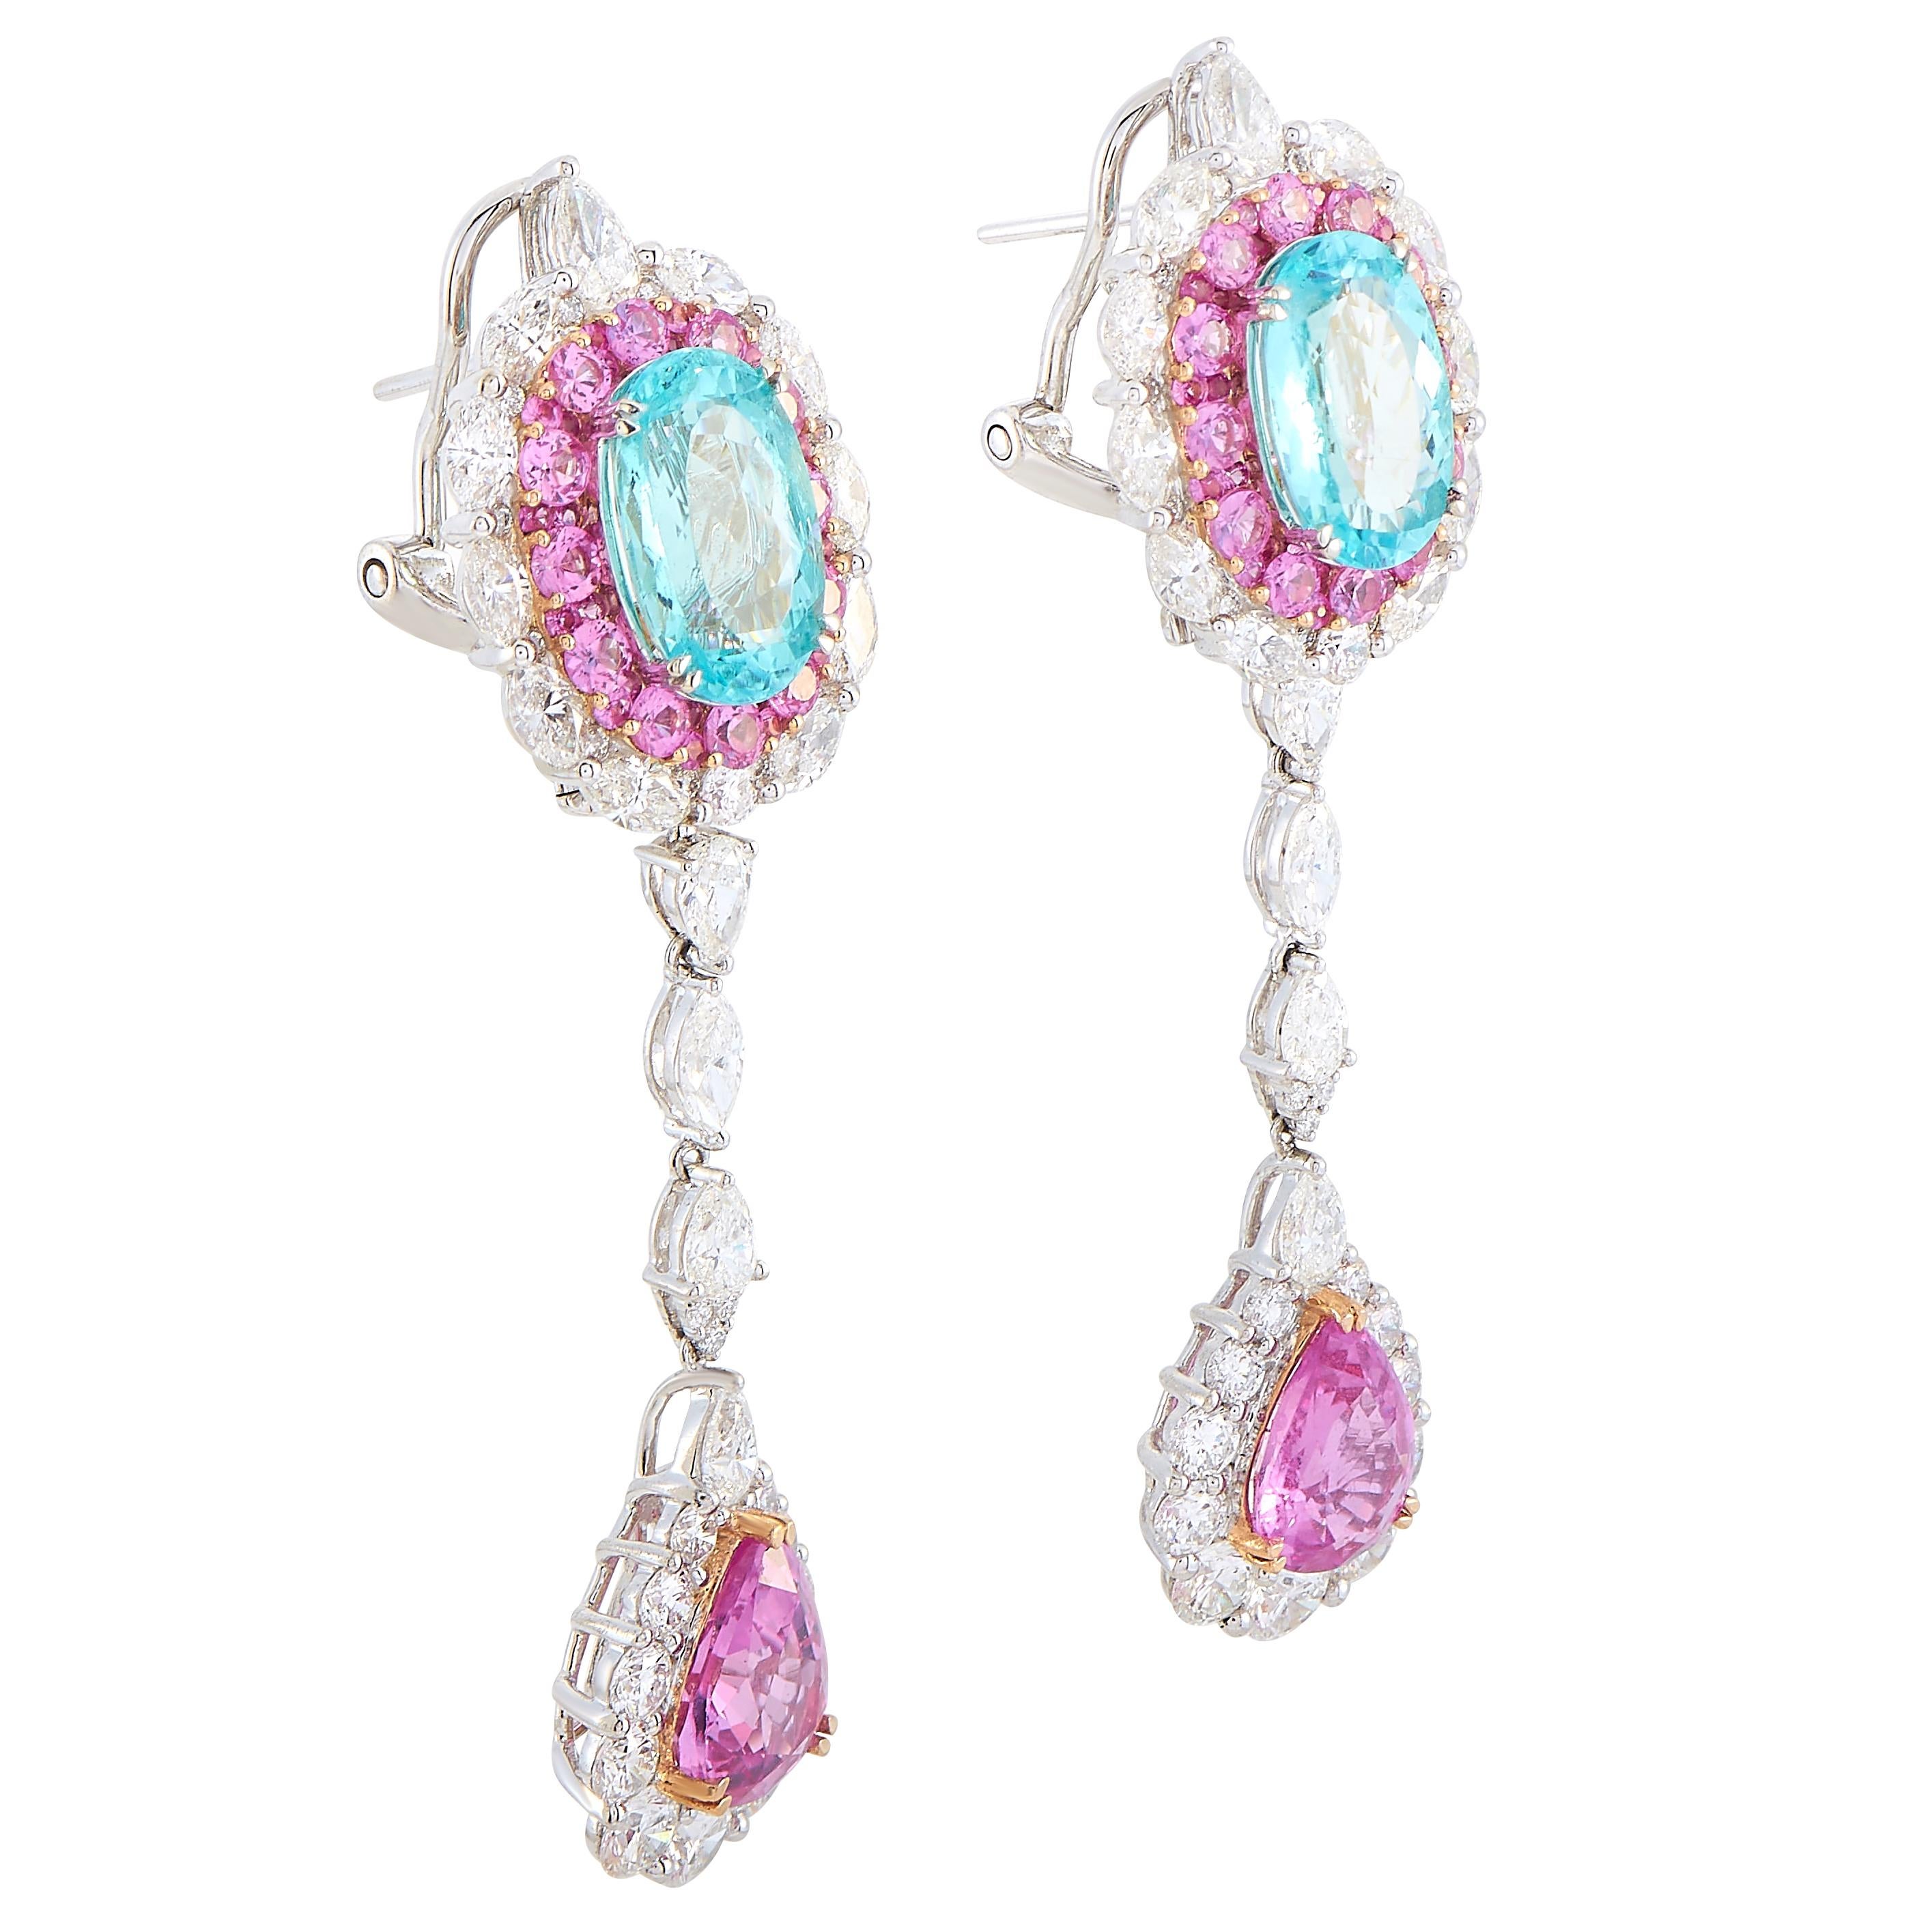 Gregg Ruth Atrium Collection Paraiba tourmaline, pink sapphire and diamond 18k white gold drop earrings accompanied by an AGL report and a Gregg Ruth certificate of authenticity.

The center stones of these earrings are 2 oval shaped Mozambique